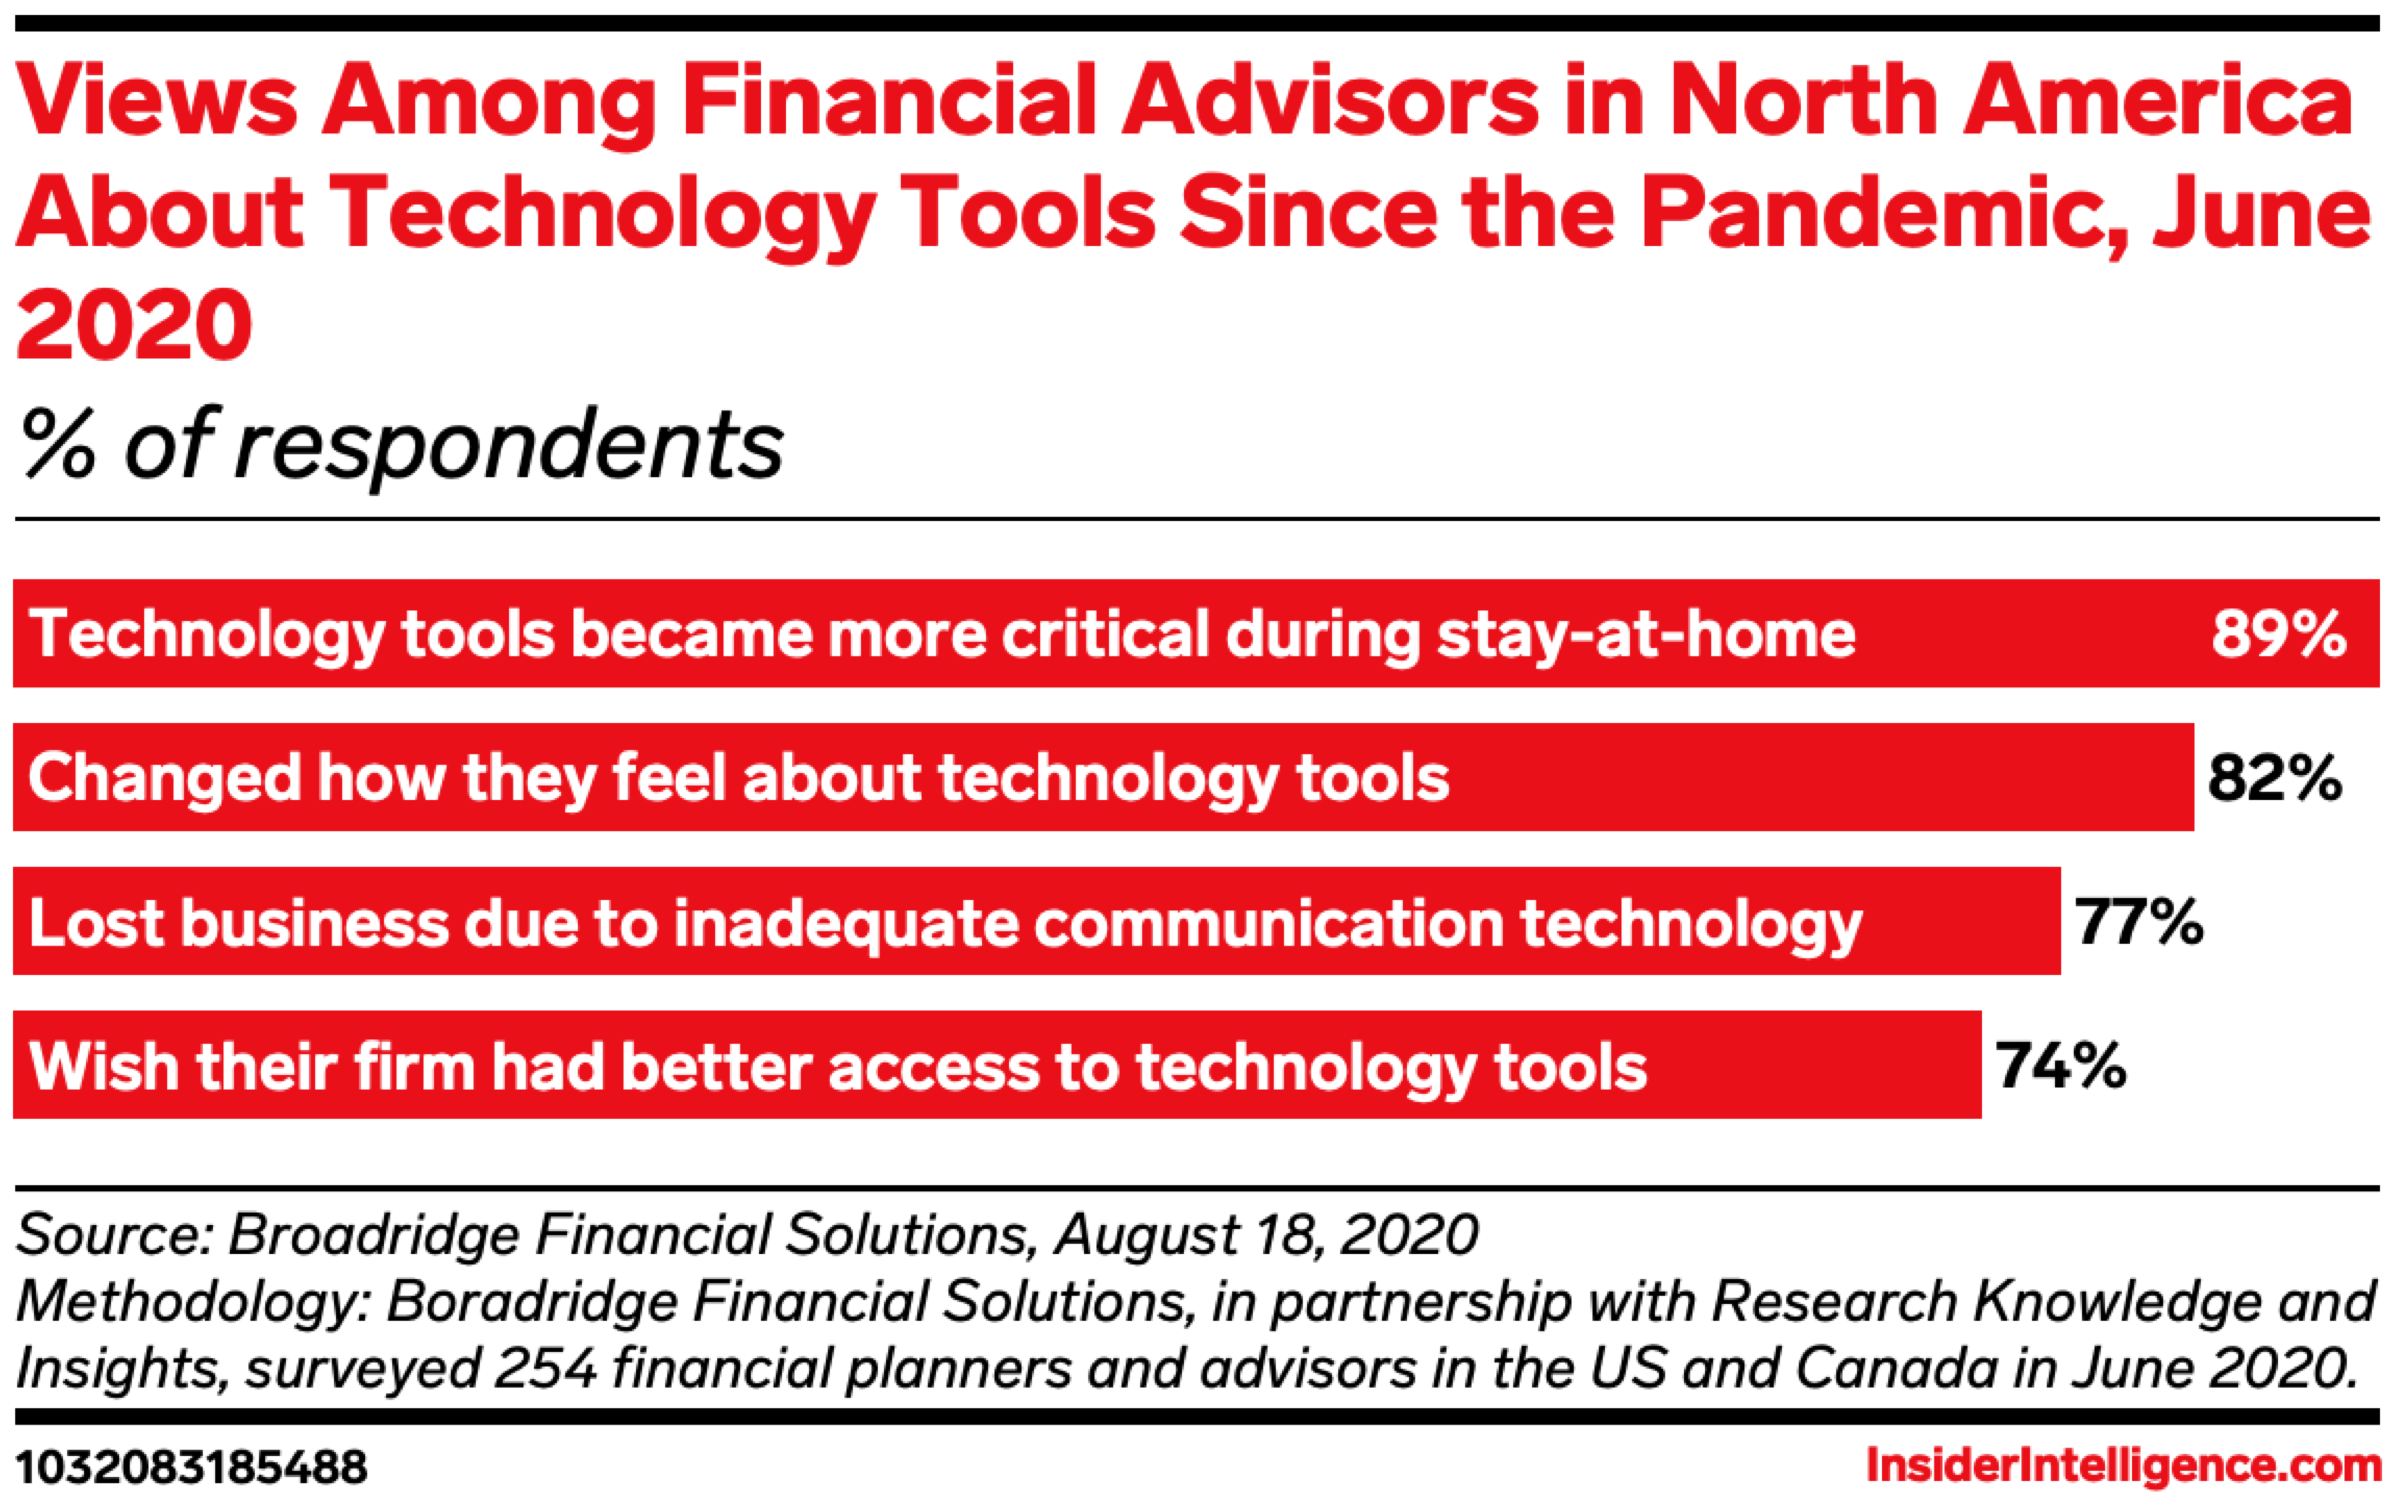 Views Among Financial Advisors in North America About Technology Tools Since the Pandemic, June 2020 (% of respondents)